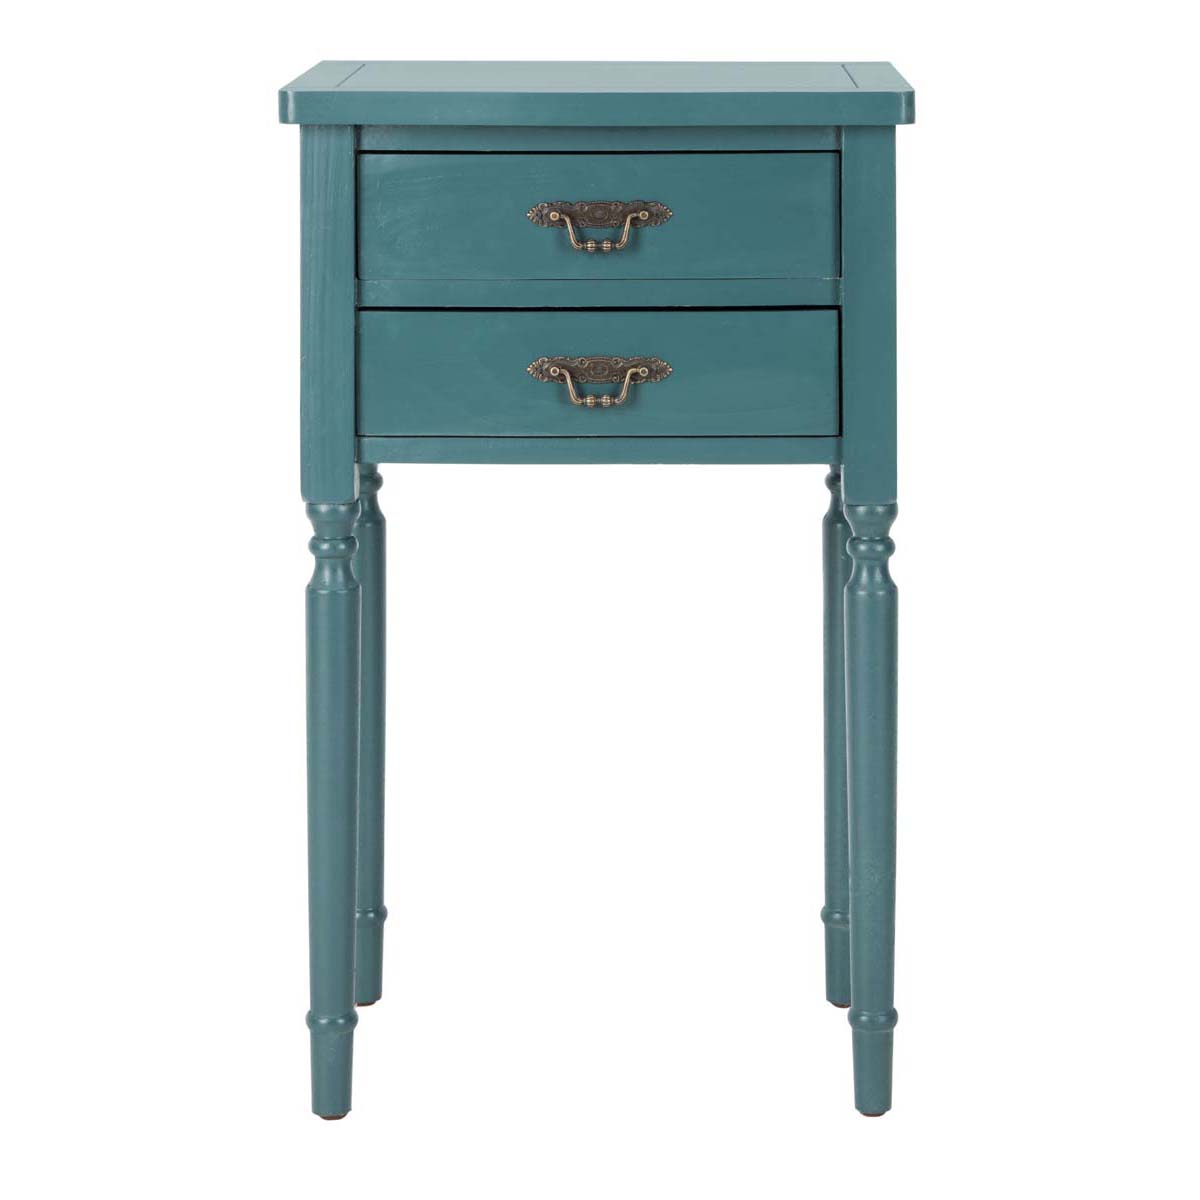 Safavieh Marilyn End Table With Storage Drawers , AMH6575 - Teal